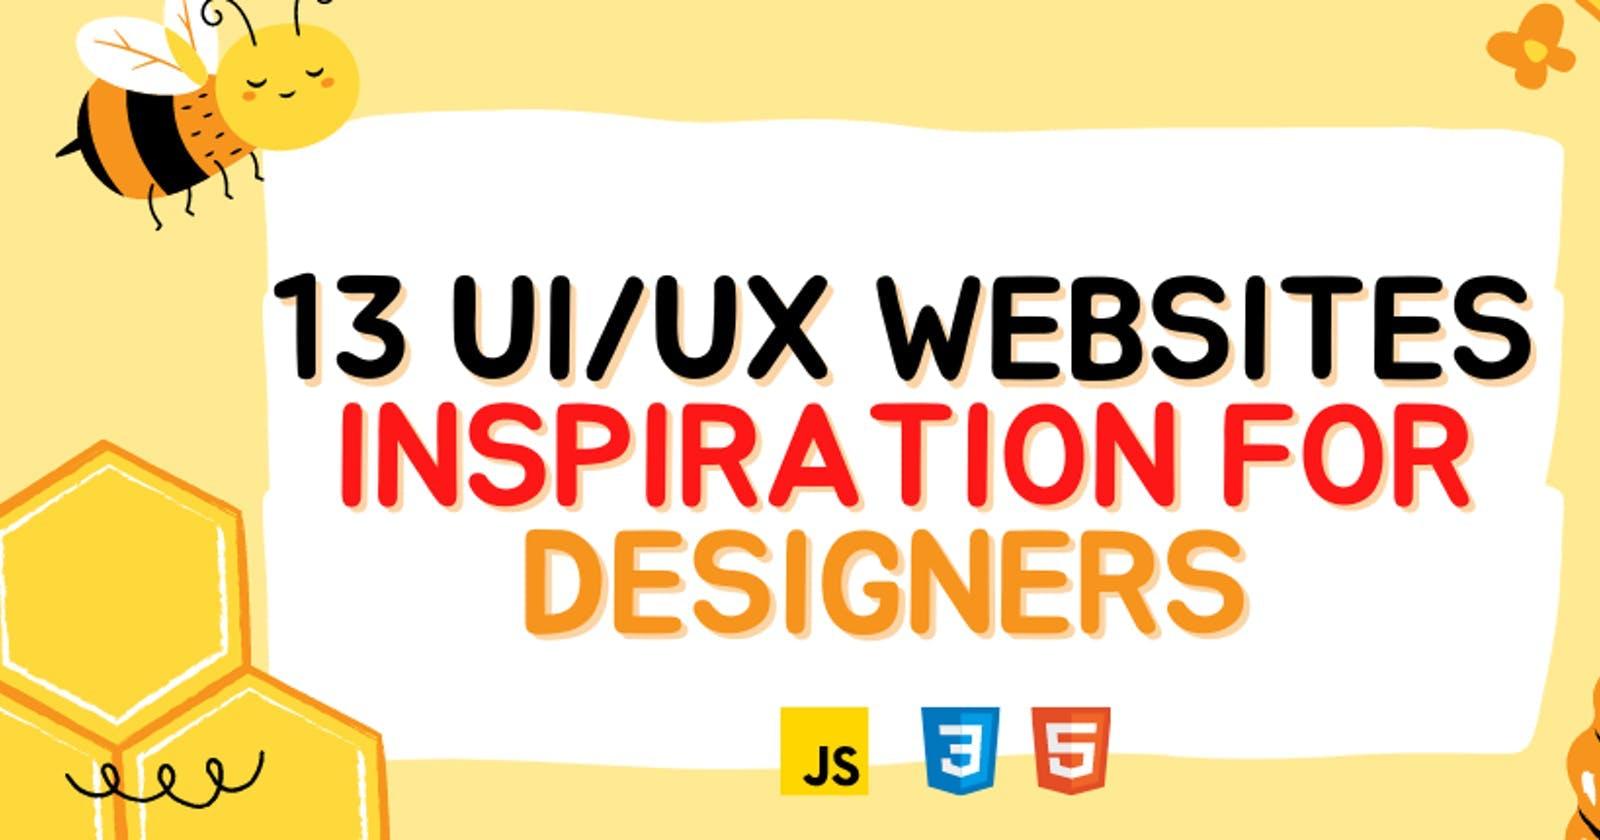 13 Ultimate UI/UX website inspiration for Designers and Developers